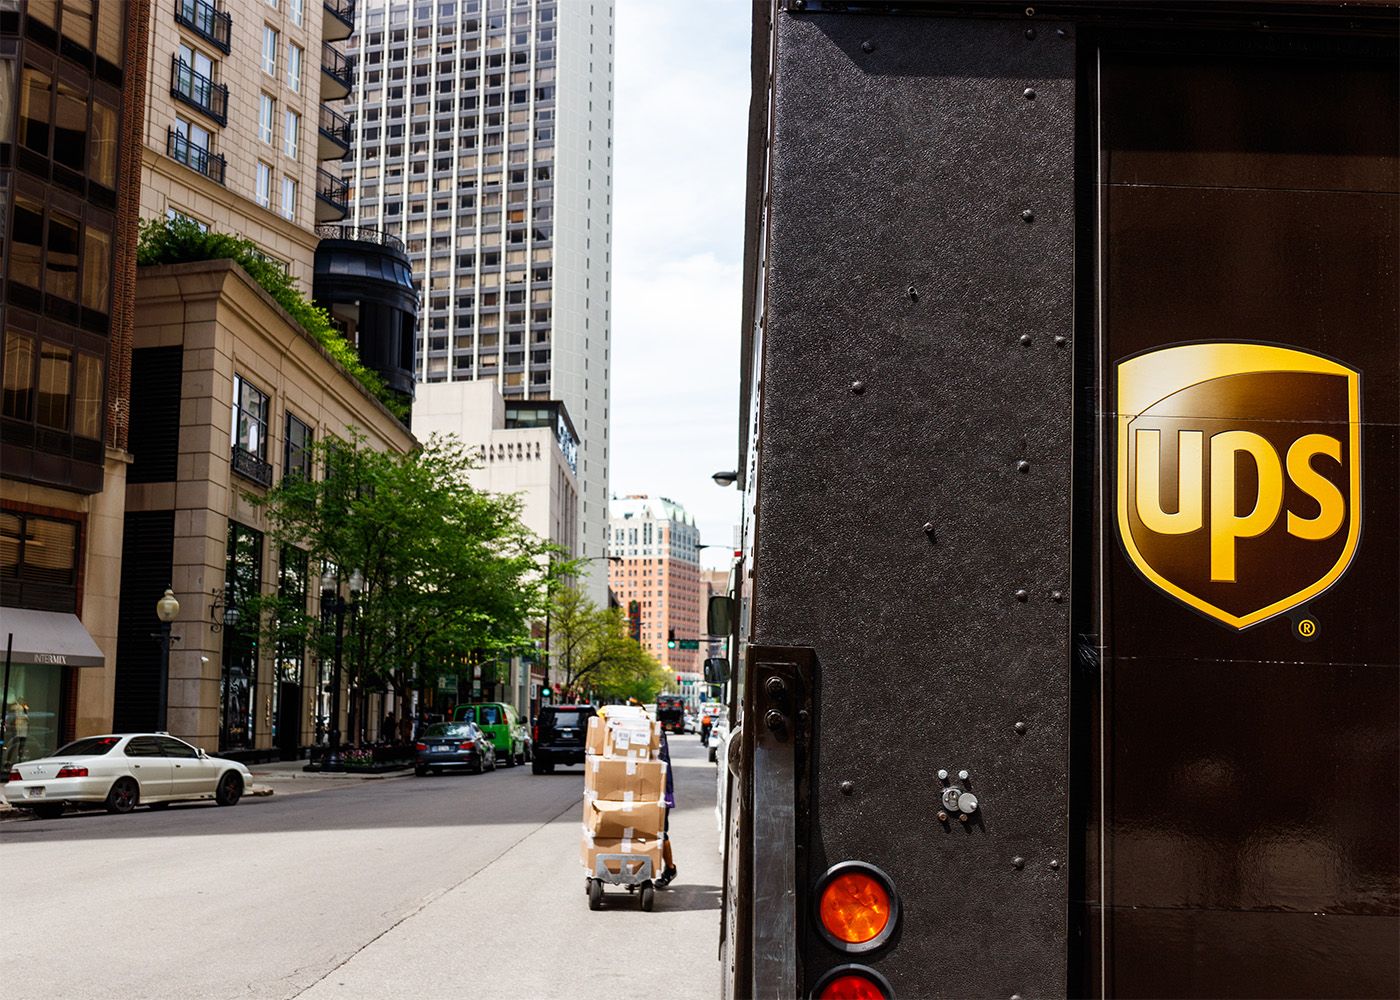 A UPS truck in the city